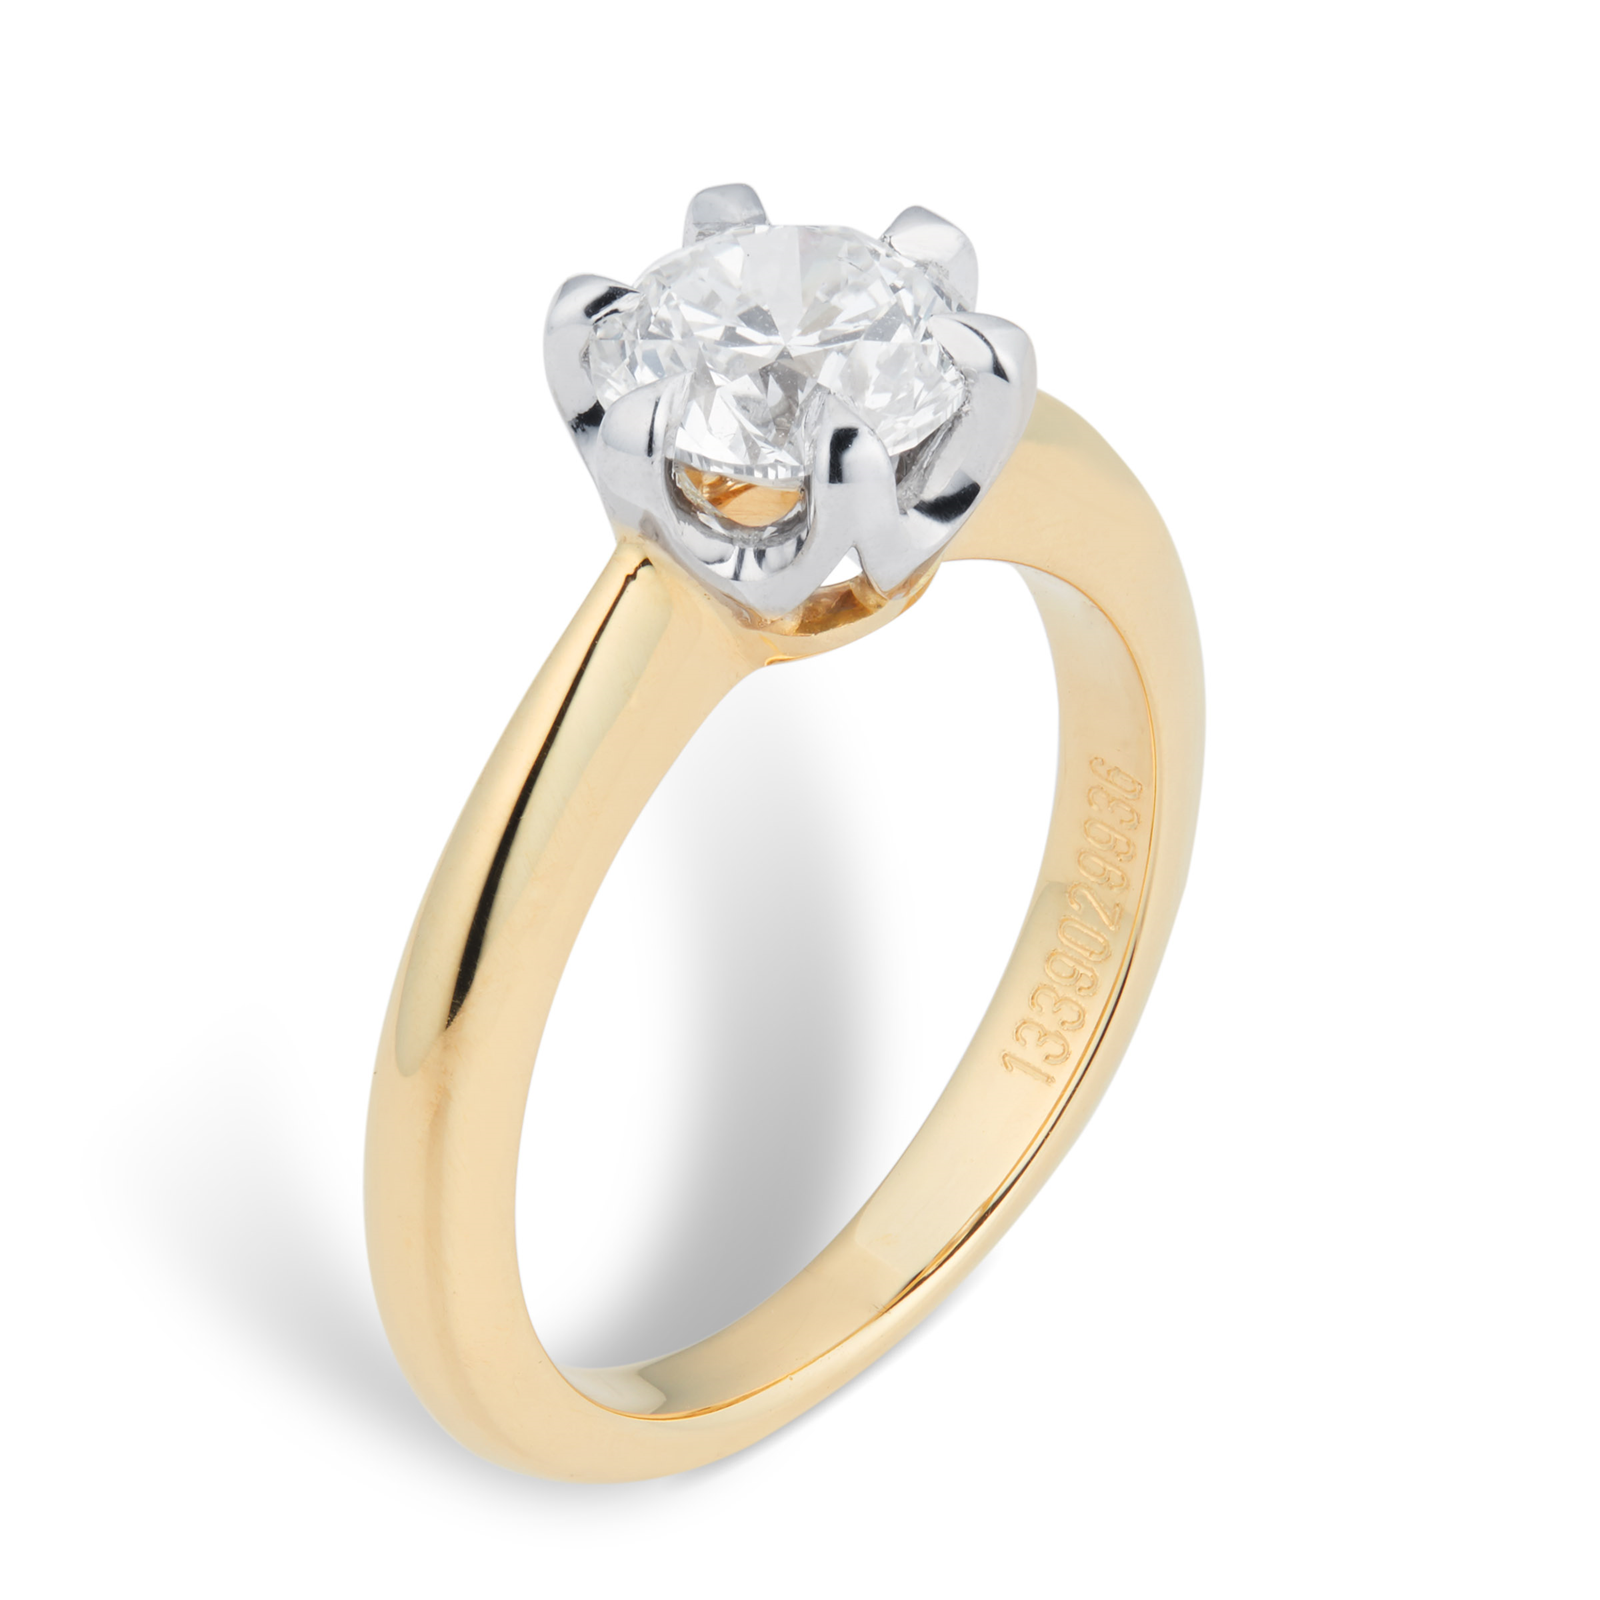 Hermione 18ct Yellow Gold 1.00ct Diamond Engagement Ring | Rings ...